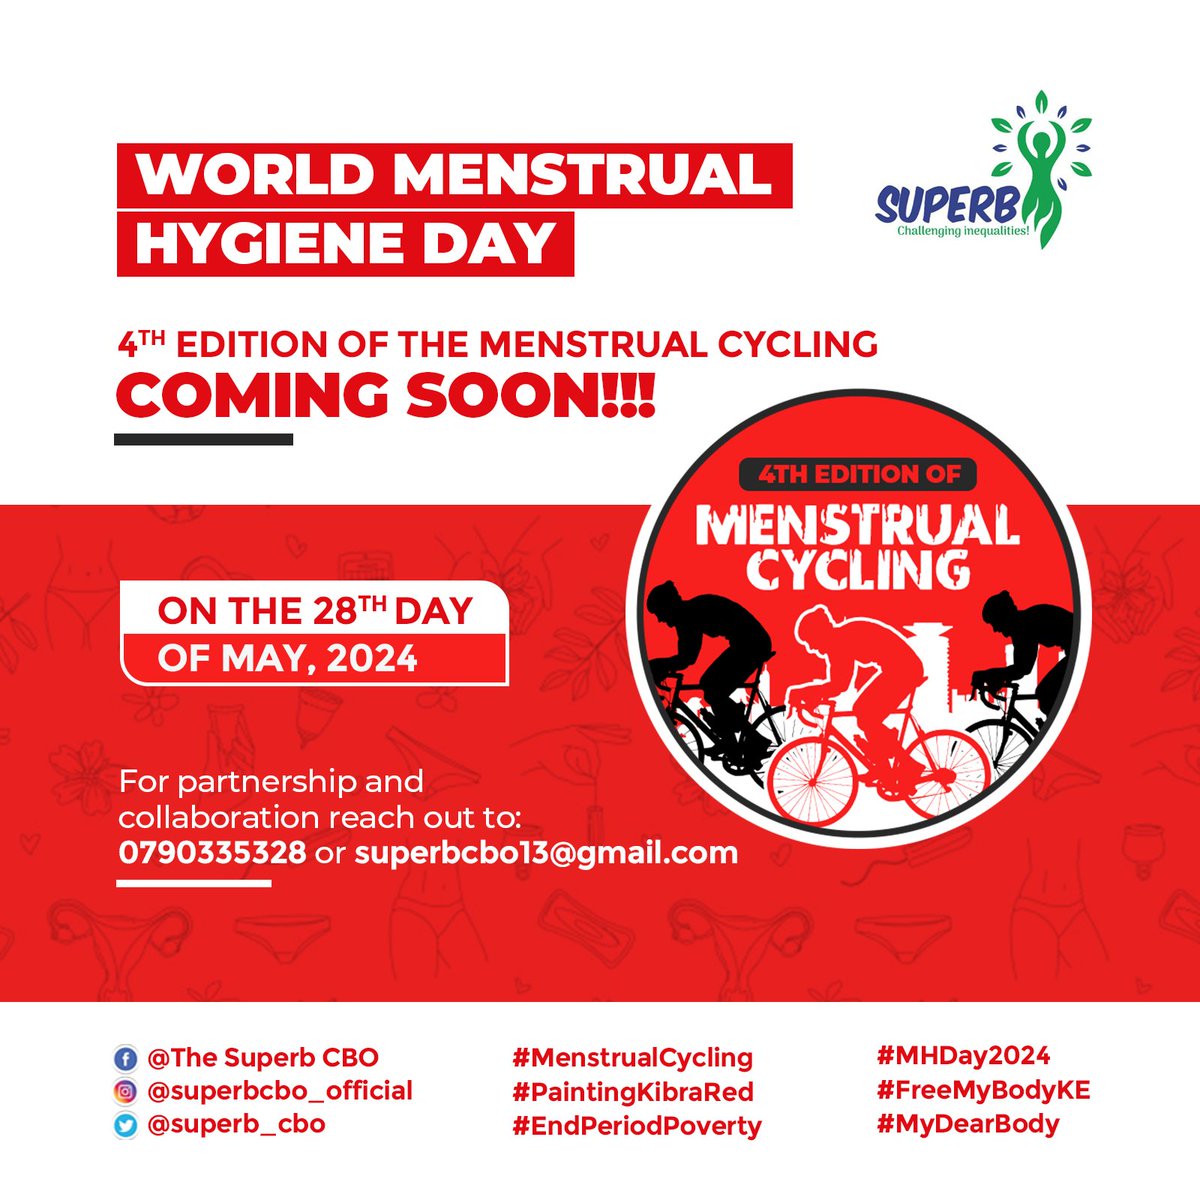 The 4th Edition of Menstrual Cycling is just around the corner. This time it's gonna be bigger and better! Let's work together for a #PeriodFriendlyWorld. For partnership and collaboration please feel free to email us @superbcbo13@gmail.com #MHM2024 #FreeMyBodyKE